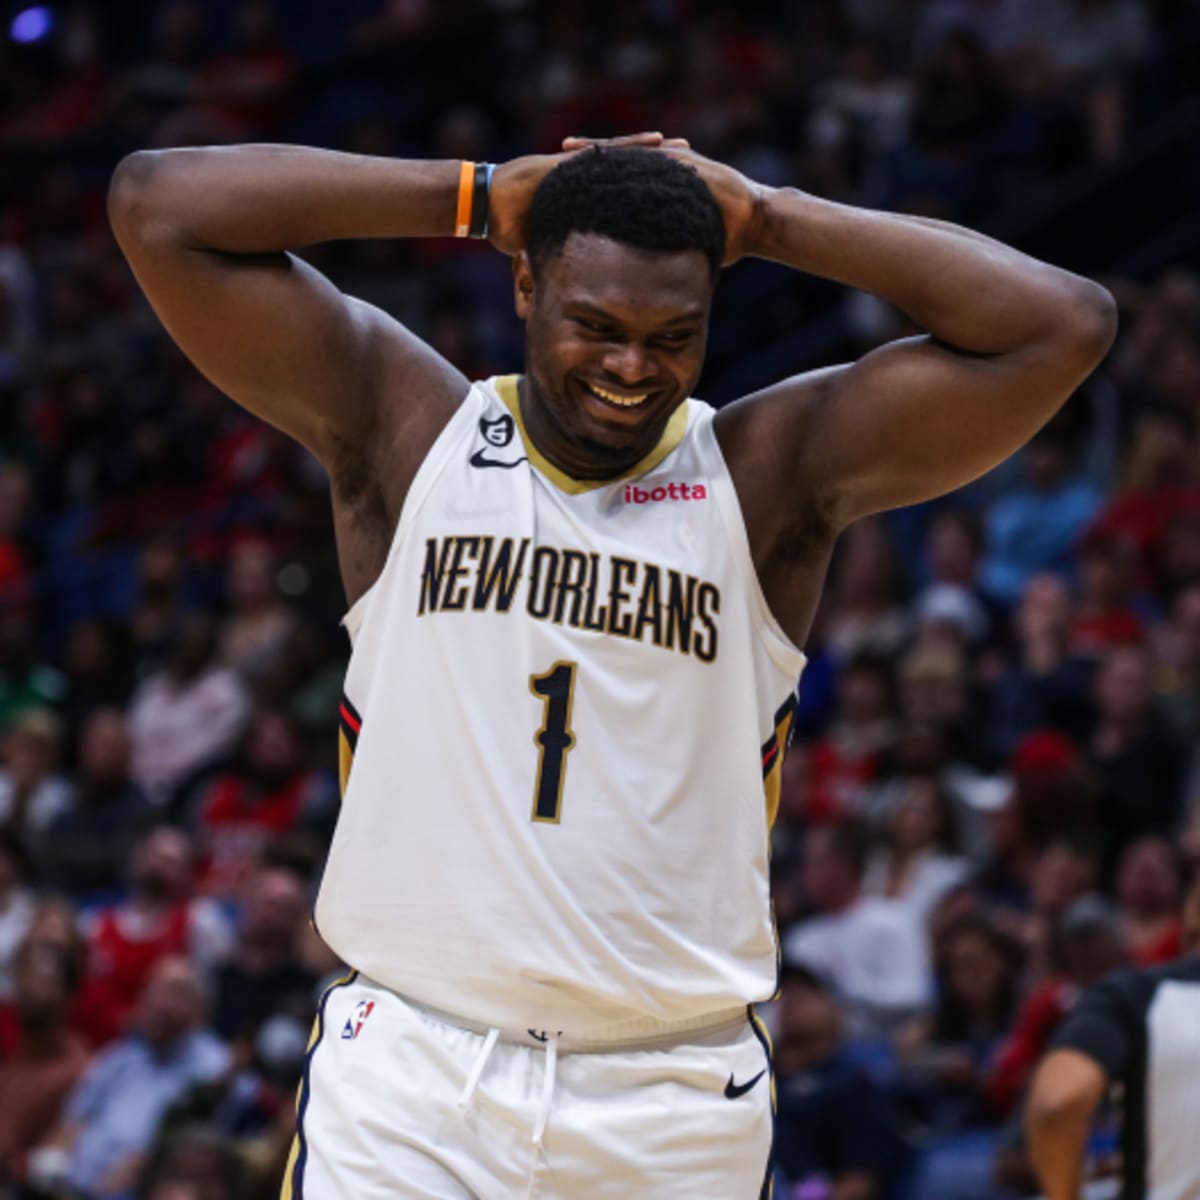 Pelicans' Zion Williamson and girlfriend reveal they're expecting